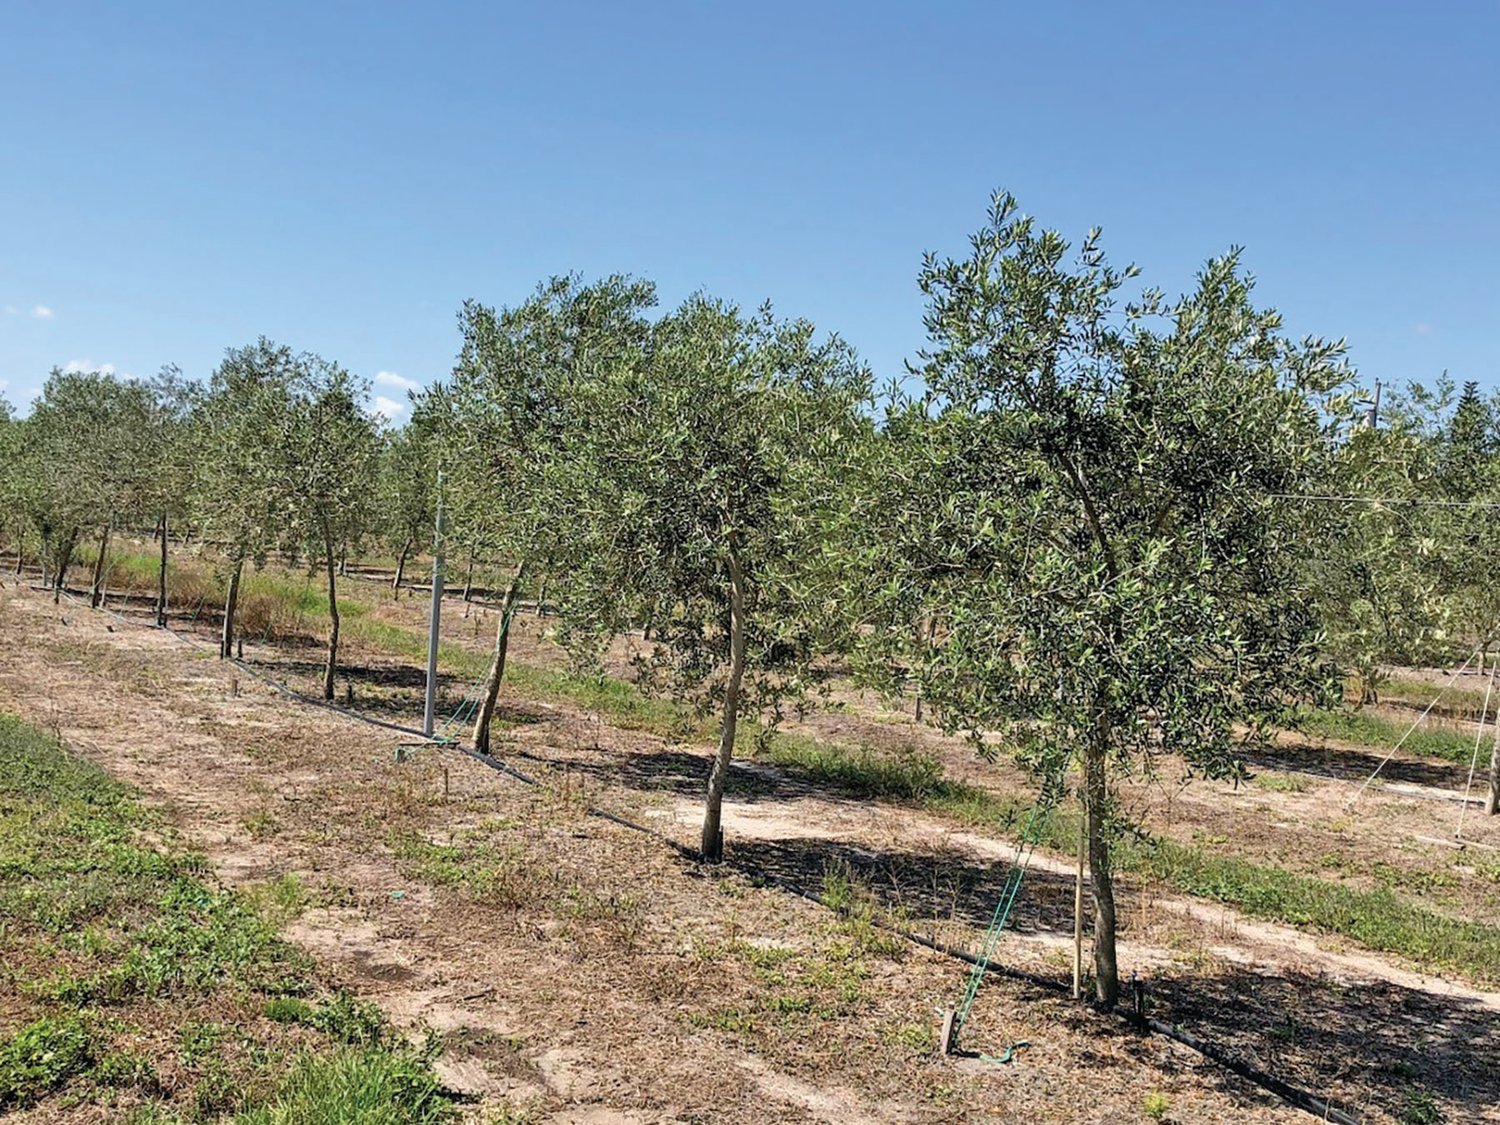 An experimental olive orchard in Wauchula, Florida.